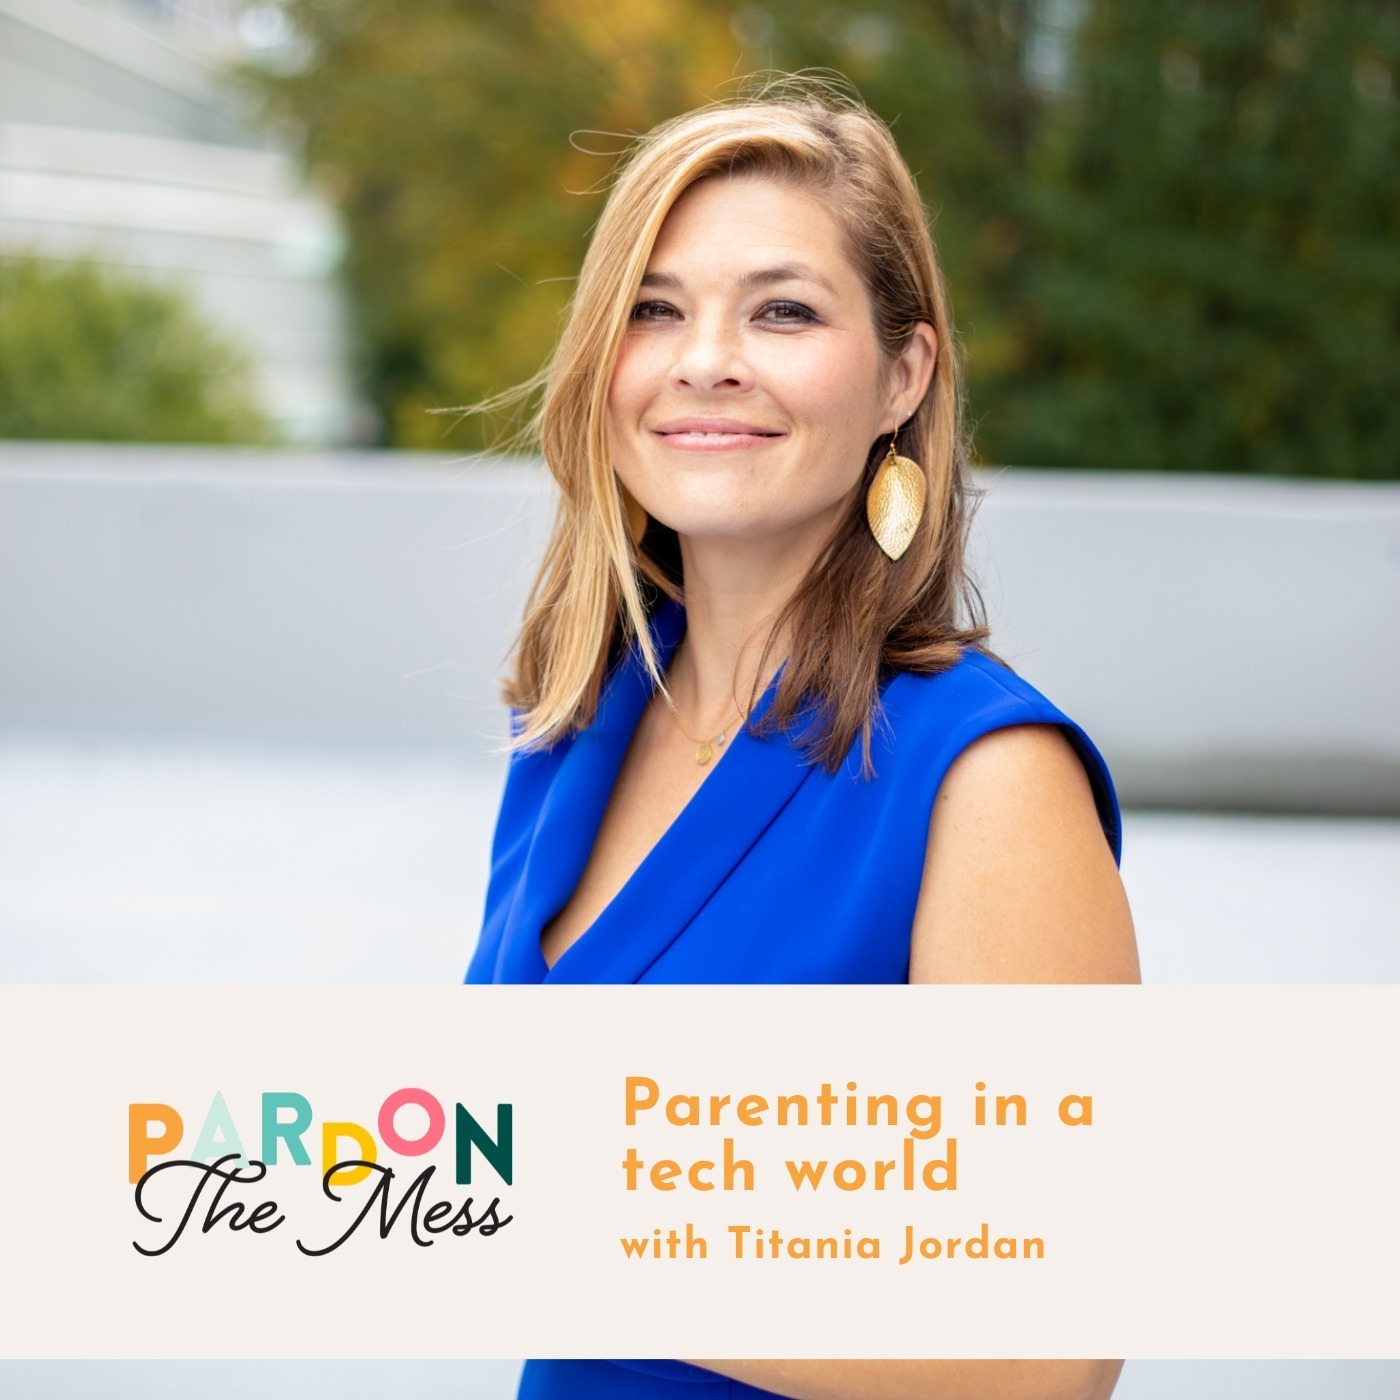 Parenting in a tech world with Titania Jordan